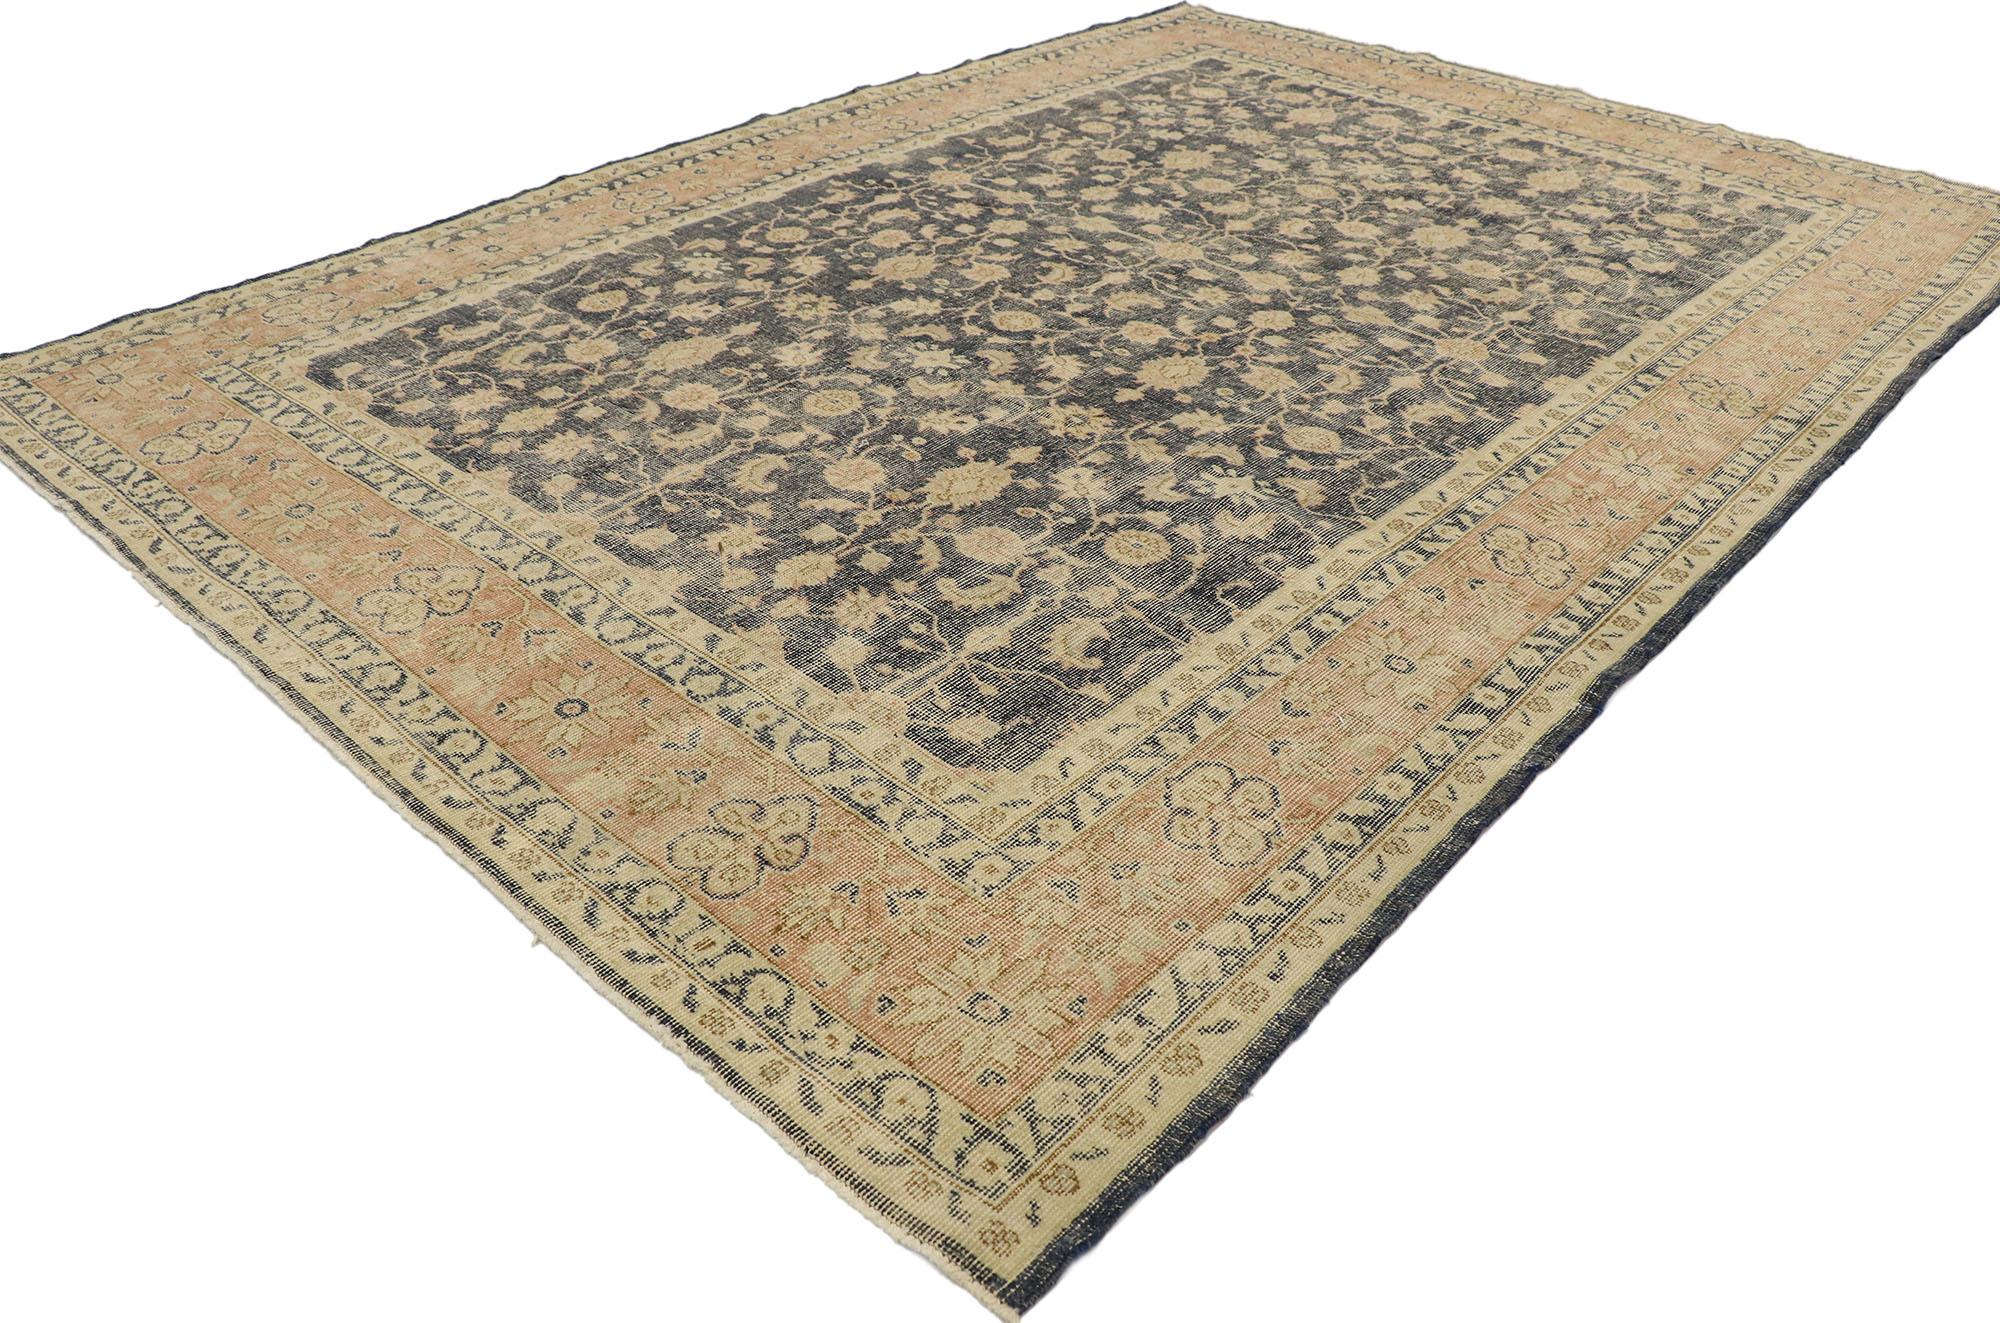 53228, distressed vintage Turkish Sivas rug with Rustic American Colonial style. Displaying well-balanced symmetry and a simple design aesthetic, this hand knotted wool distressed vintage Turkish Sivas rug beautifully embodies American Colonial